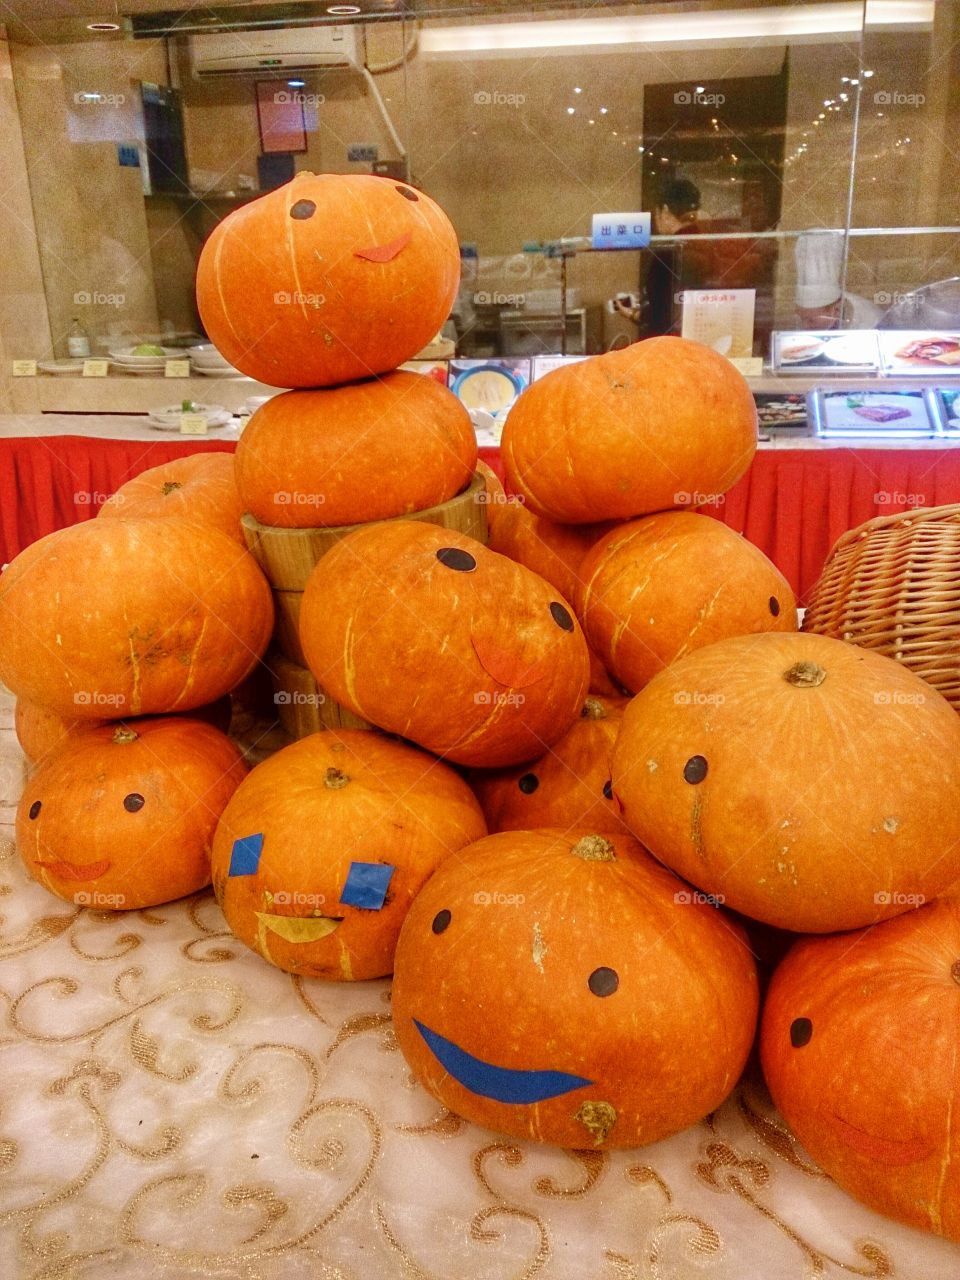 Pumpkins Anyone?. These pumpkins are for halloween.